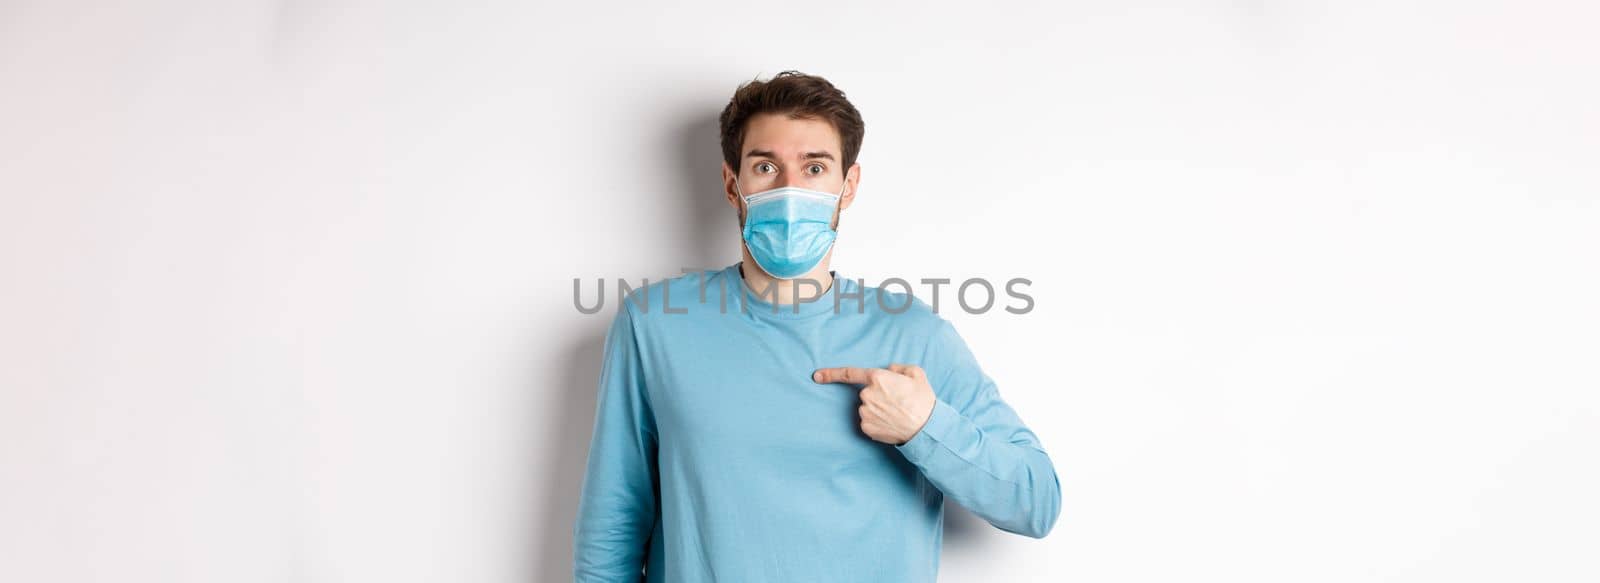 Coronavirus, health and quarantine concept. Surprised guy in medical mask points at himself, standing over white background.